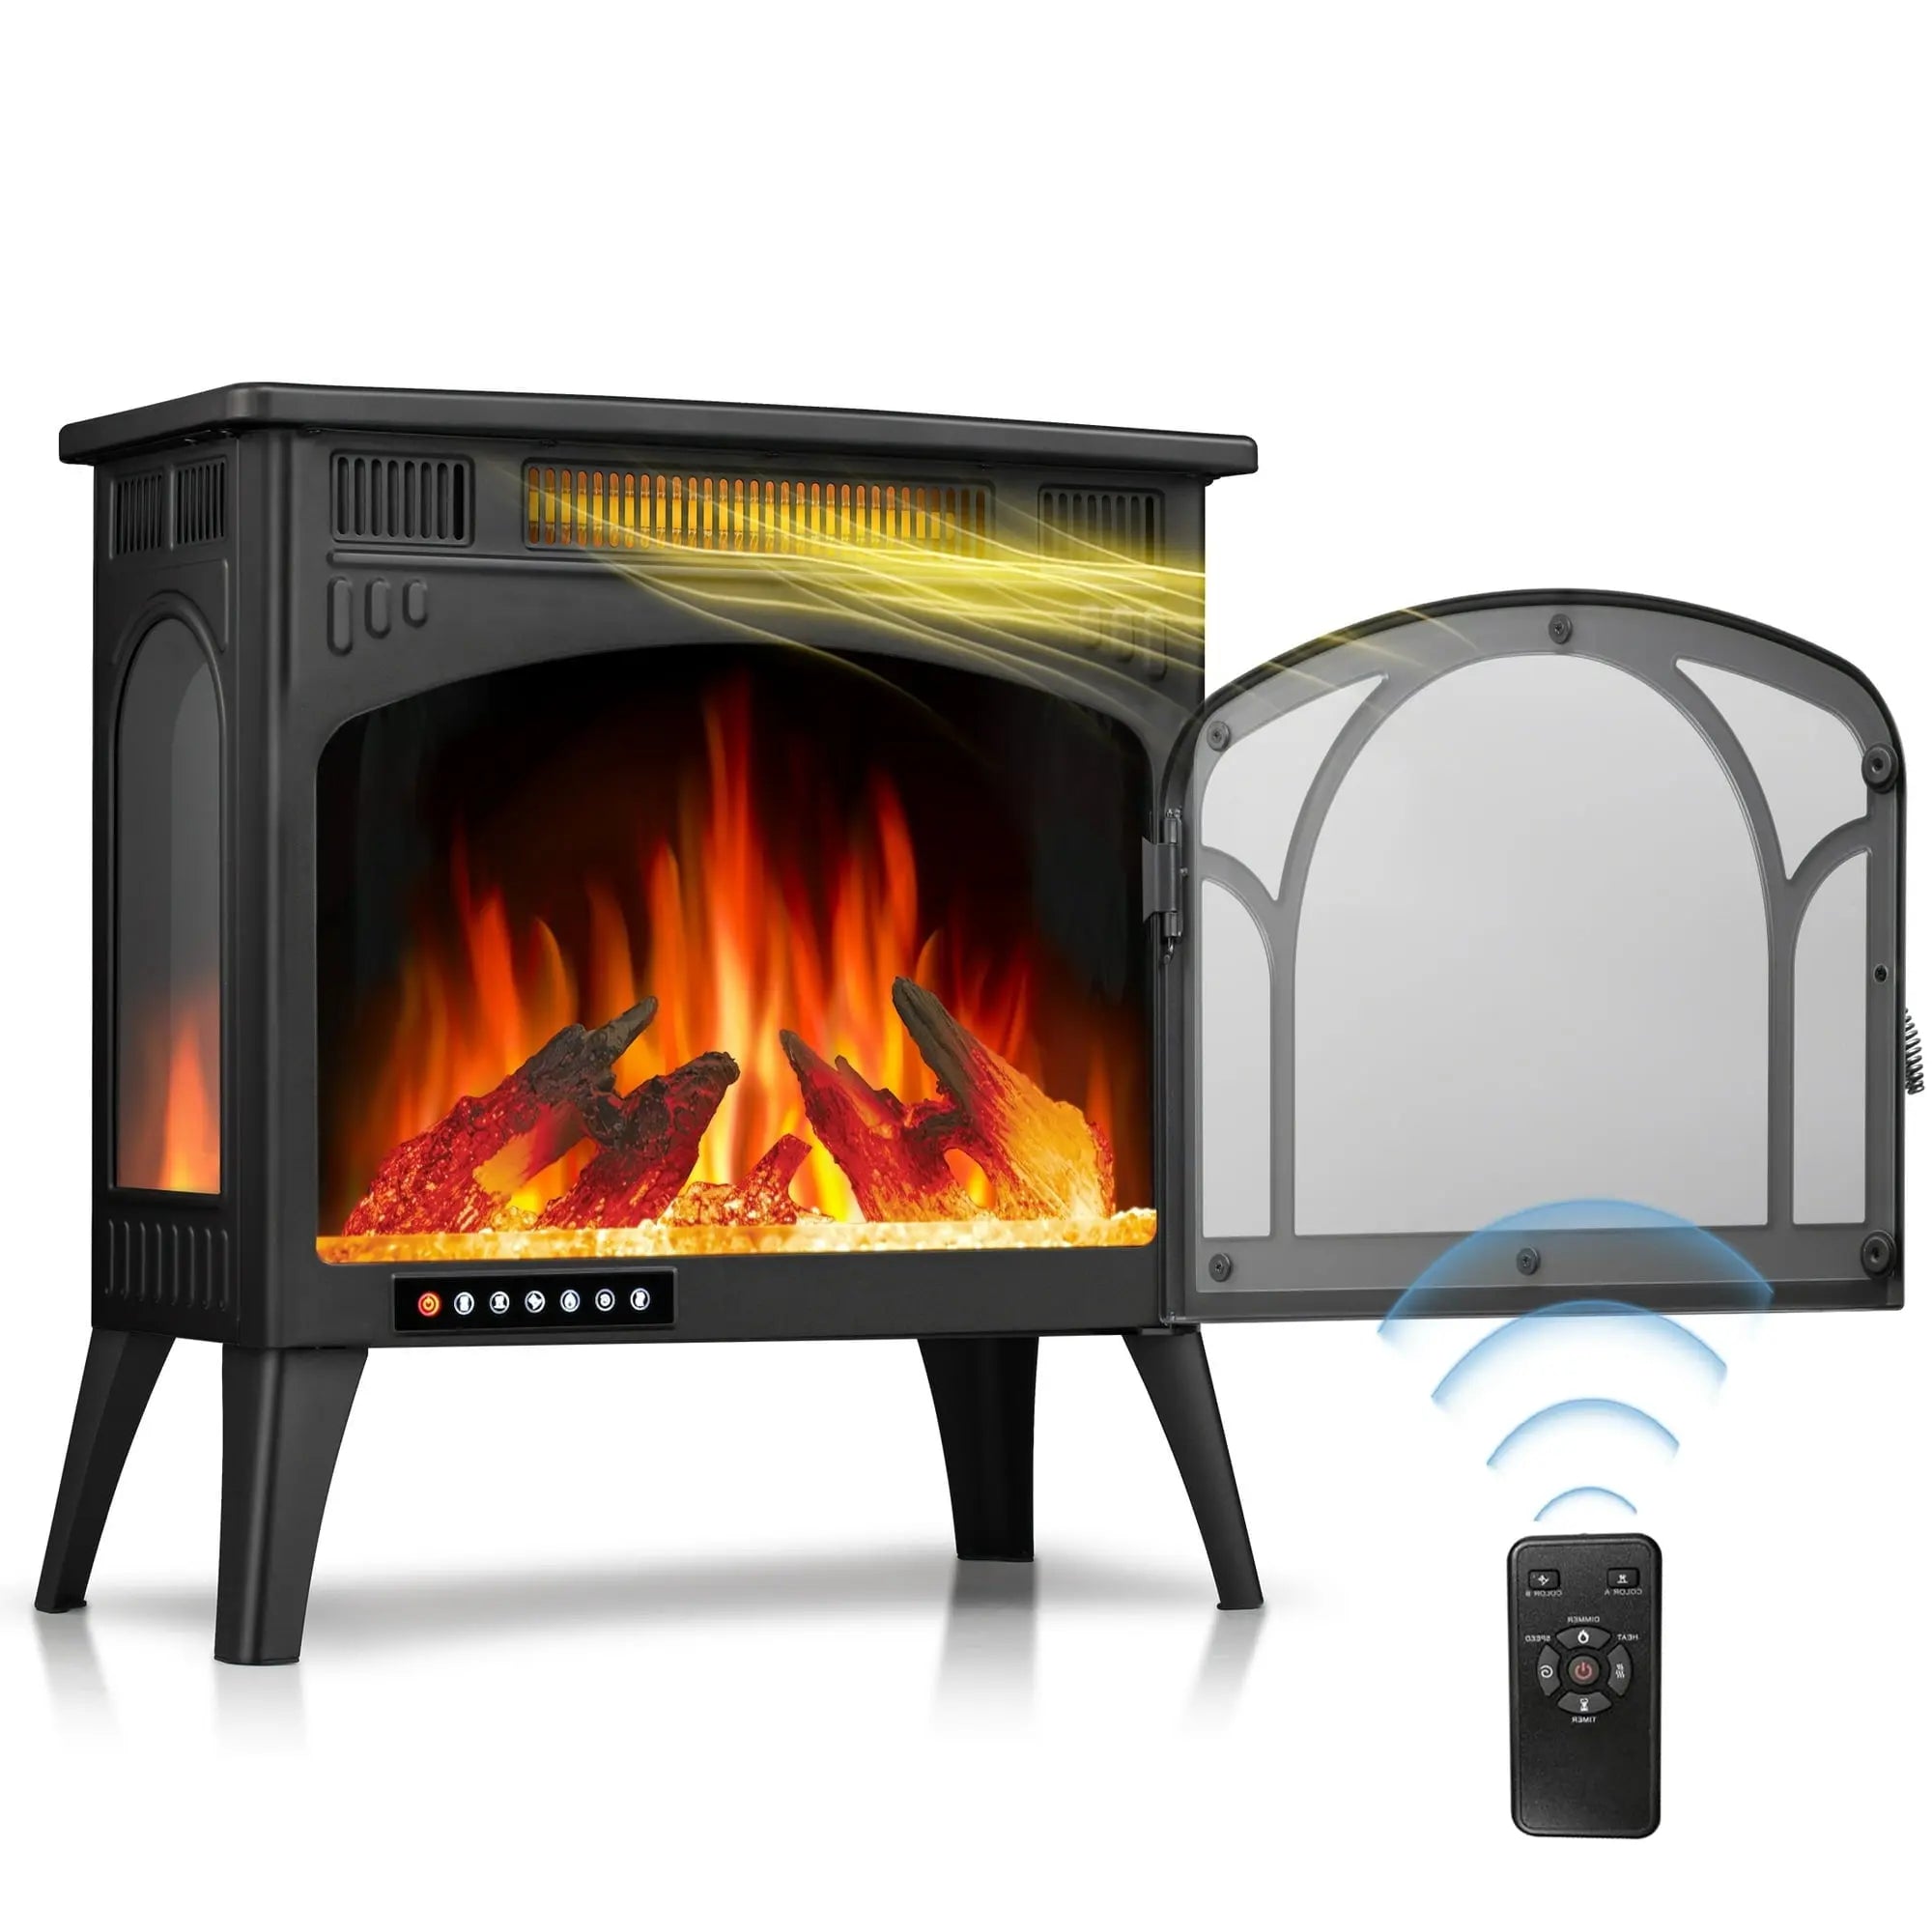 LHRIVER  Electric Fireplace Heater 25’’ with 3D Realistic Flame Effect, Freestanding Fireplace, Different Flame Color, 500W/1500W,- Black